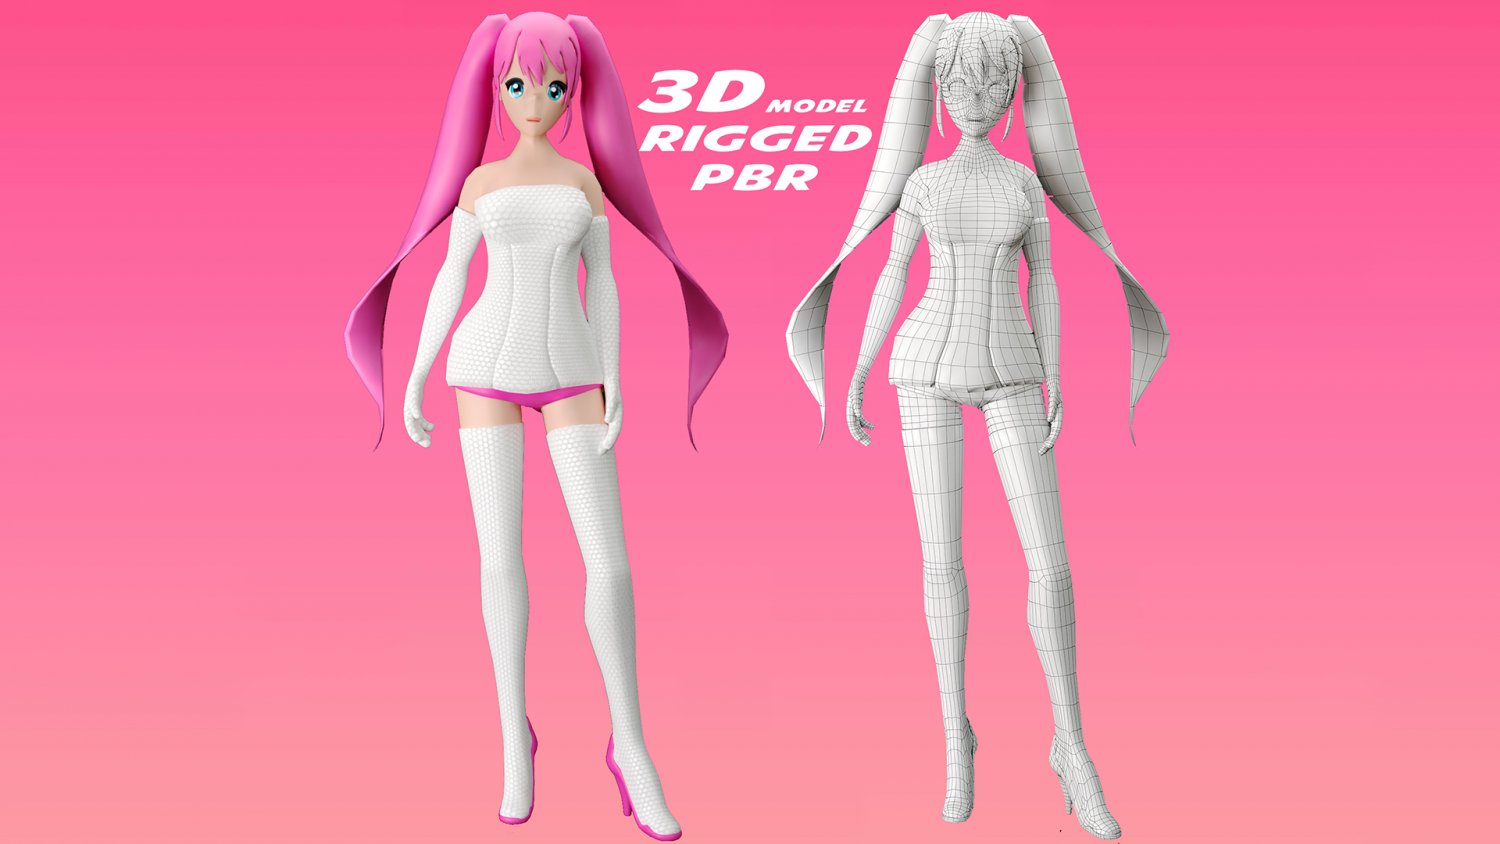 Original】Anime Character : Youko (Free / Miko V3 / Contain VRM) : This  character model belongs to Japanese anime style. This model has been  converted into fbx file using Blender. Users can